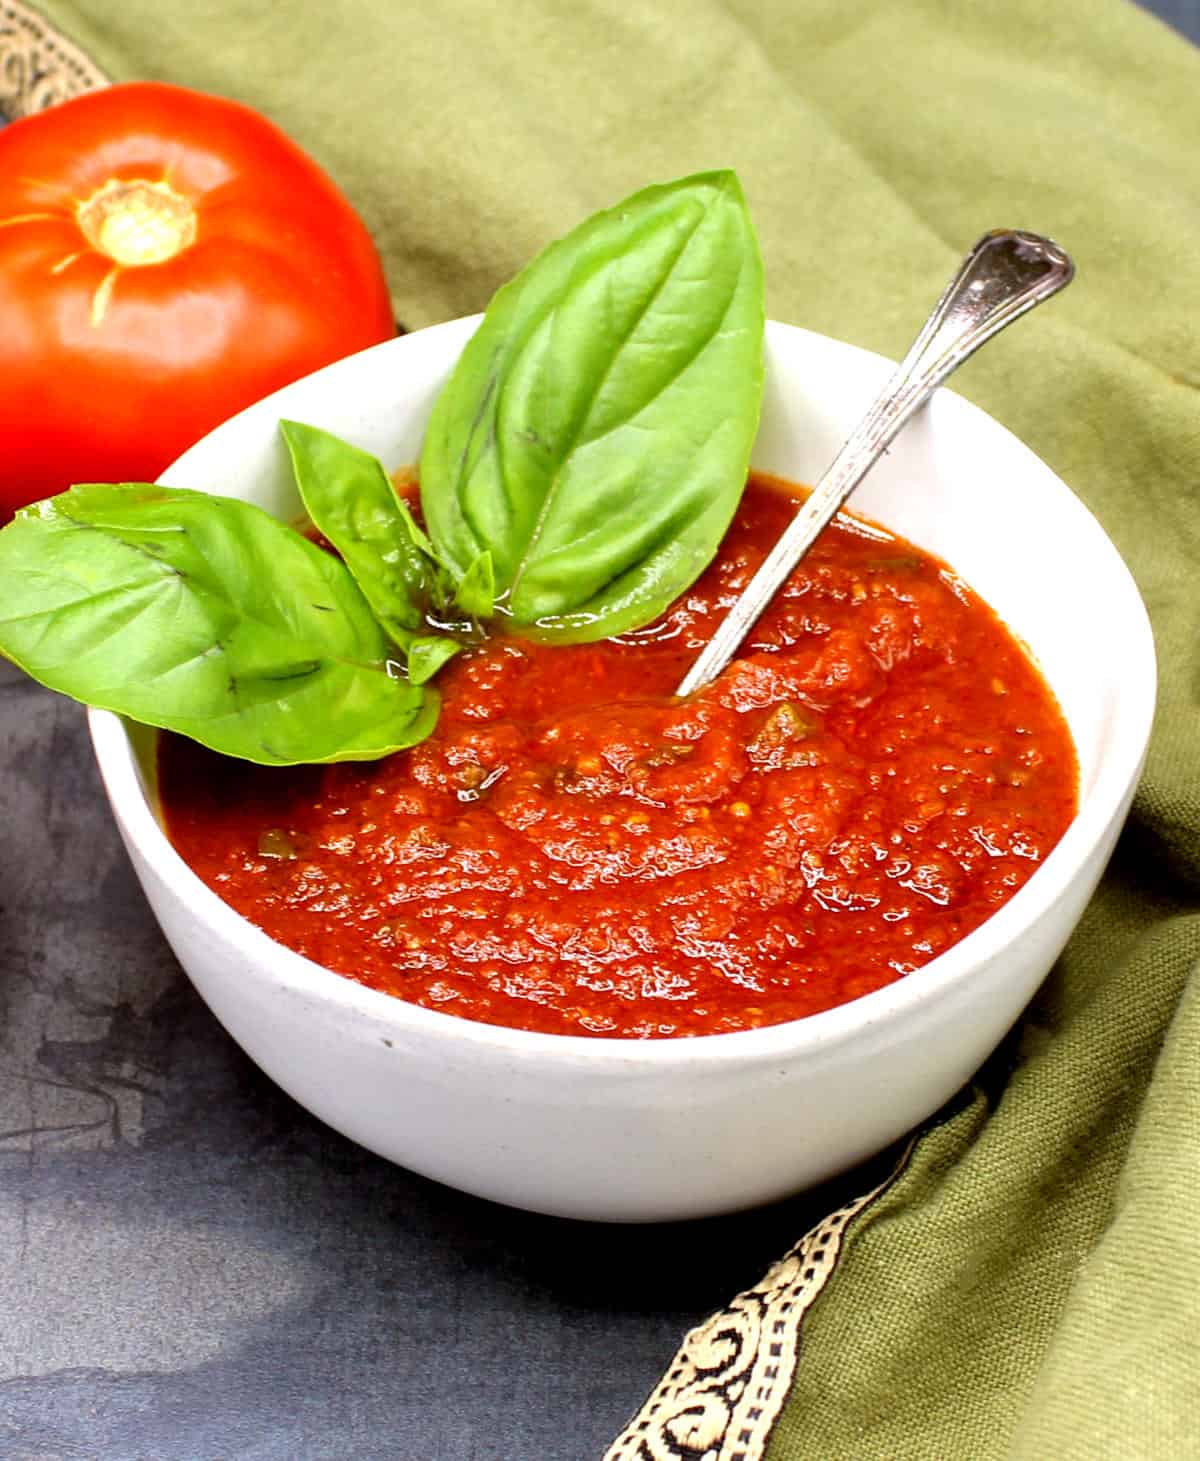 Homemade tomato sauce in white bowl with basil leaves. In the background is a tomato and a green napkin.